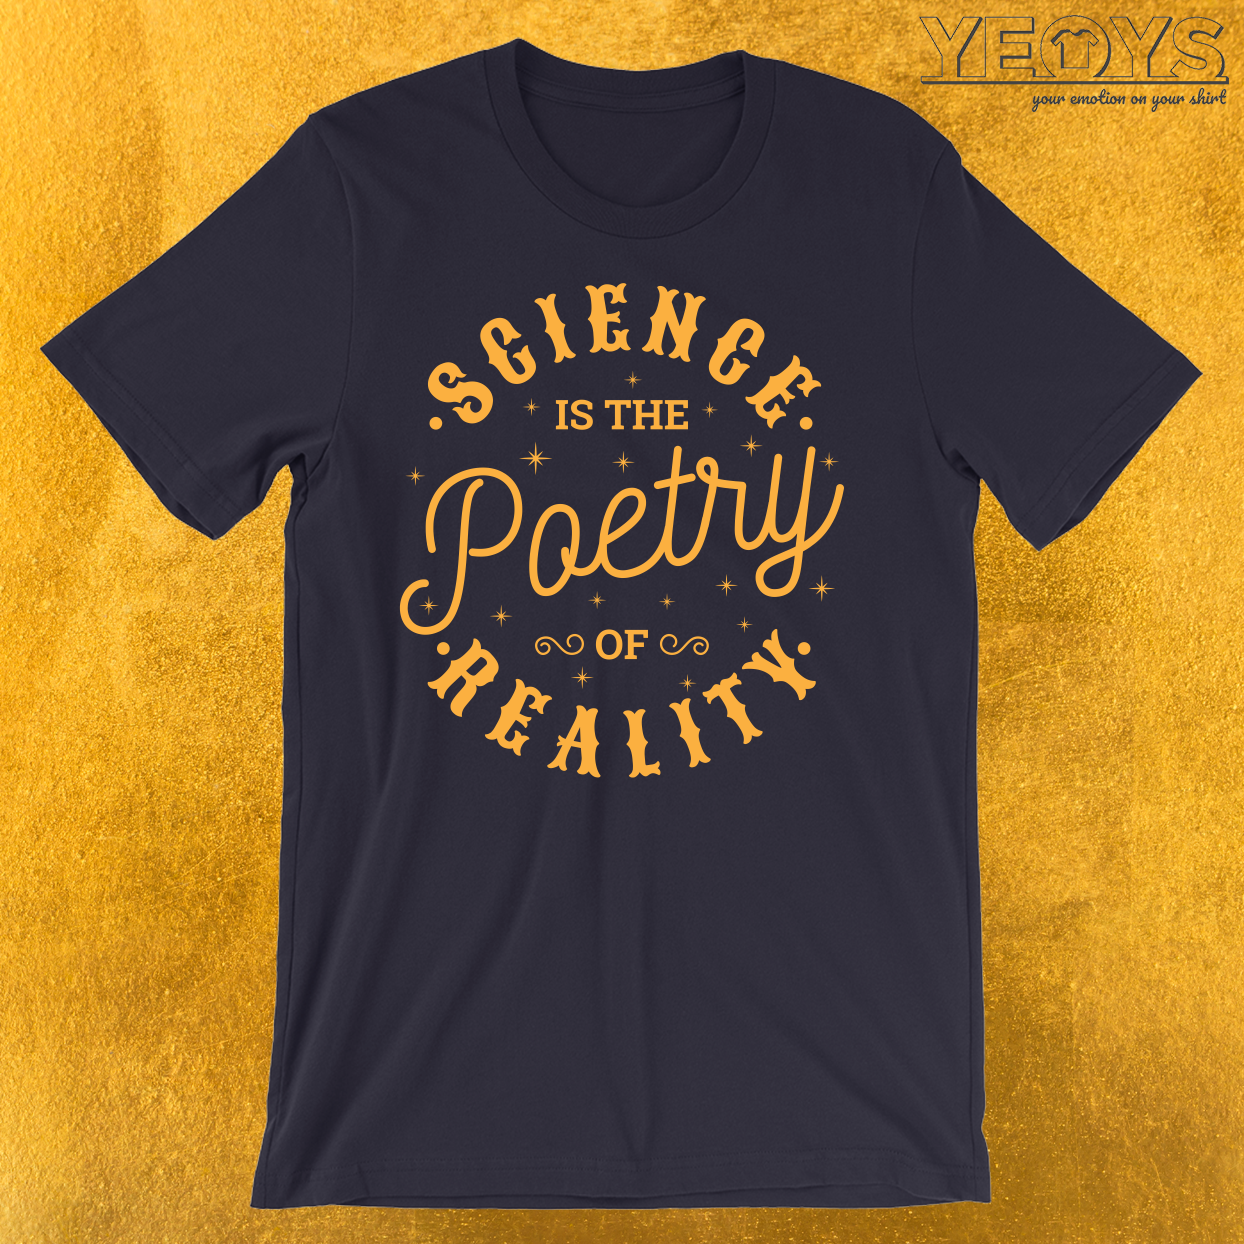 Science Is The Poetry Of Reality T-Shirt